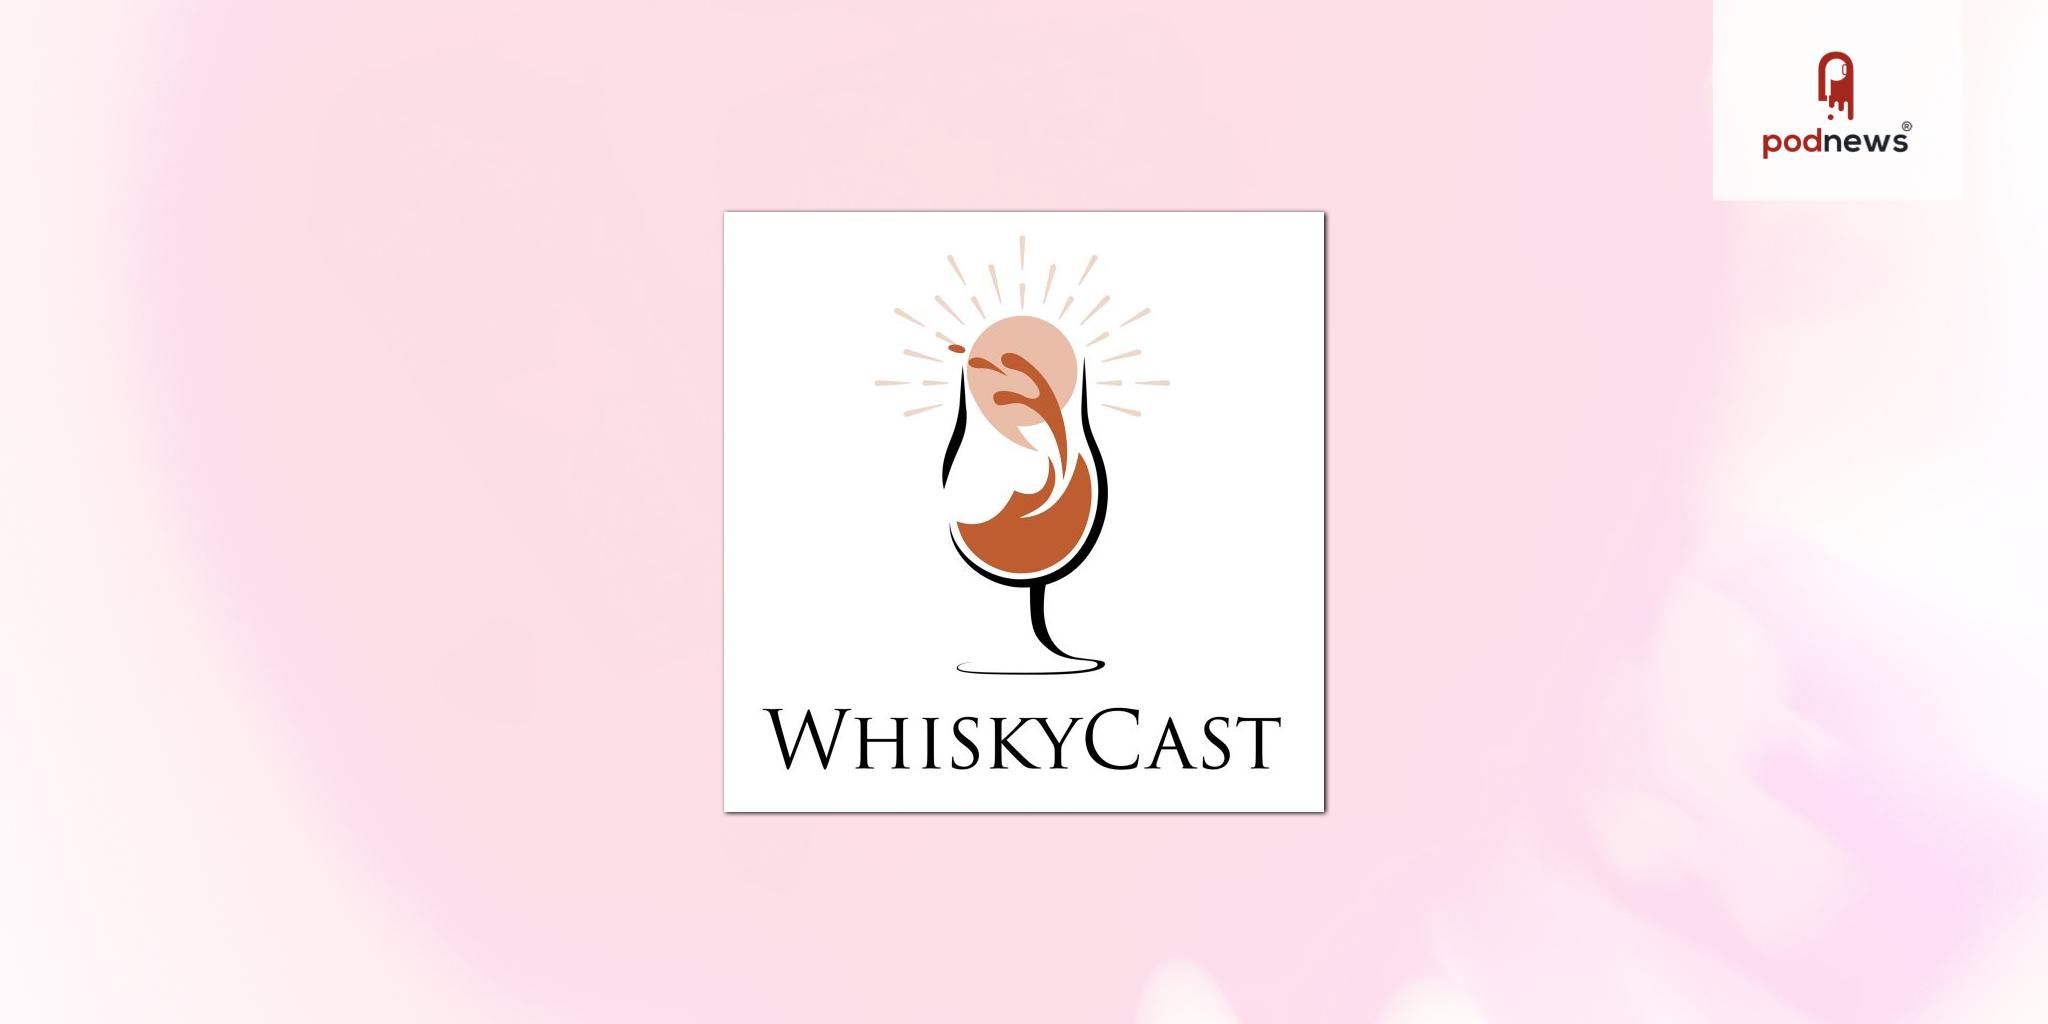 Welcome, whisky curious - WhiskyCast launches mobile app